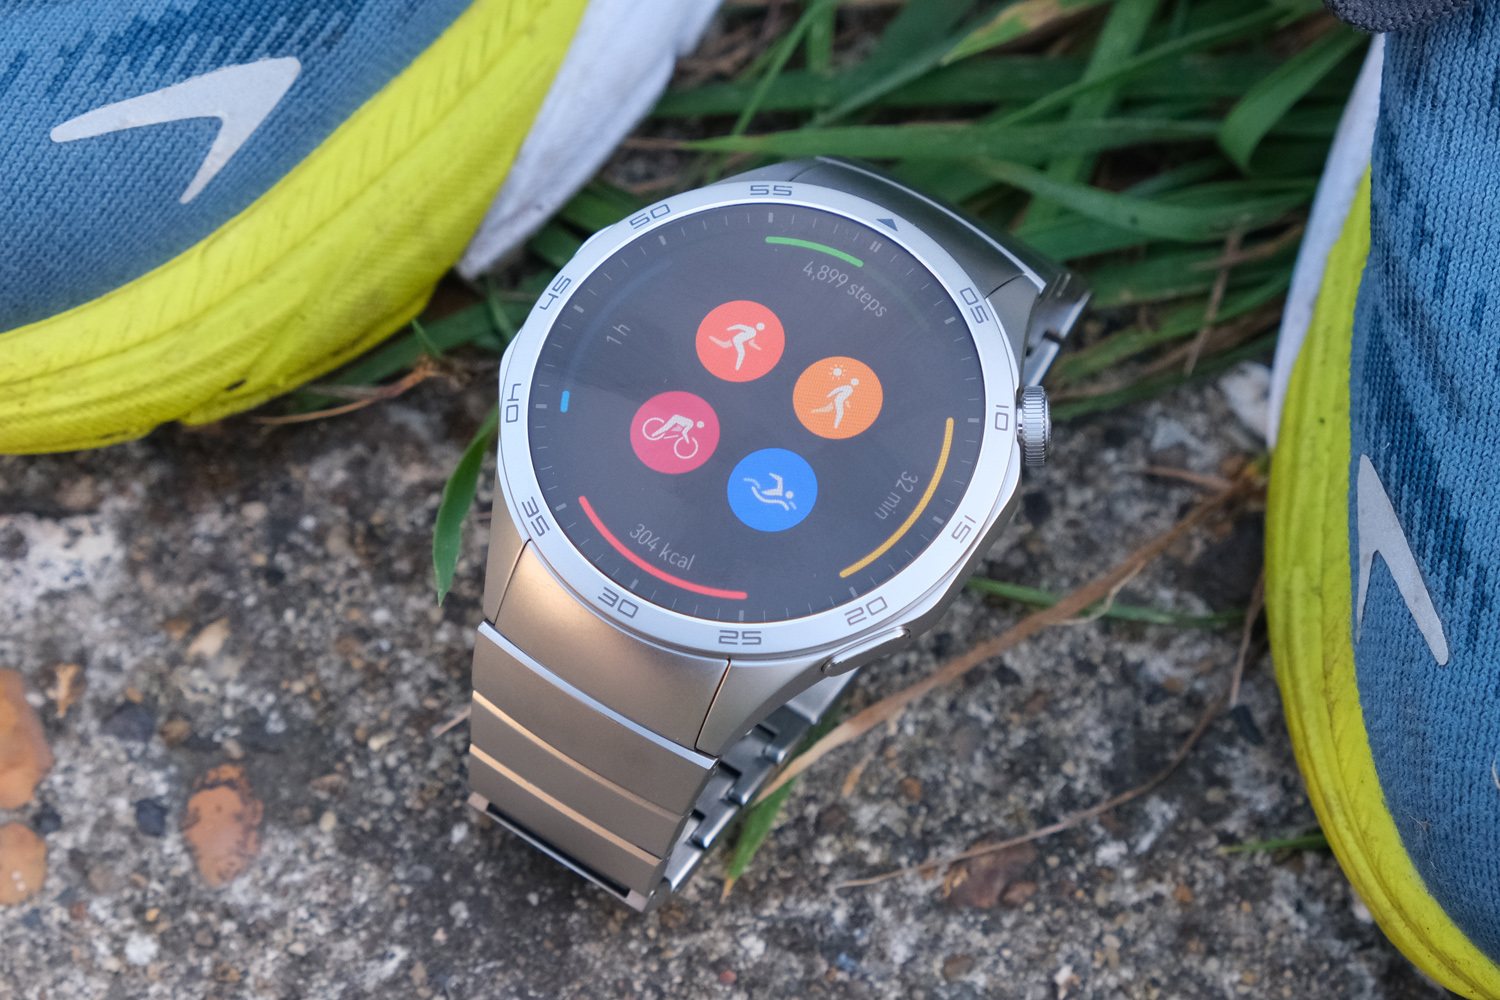 Huawei Watch GT4: Comprehensive Review & Analysis — Eightify